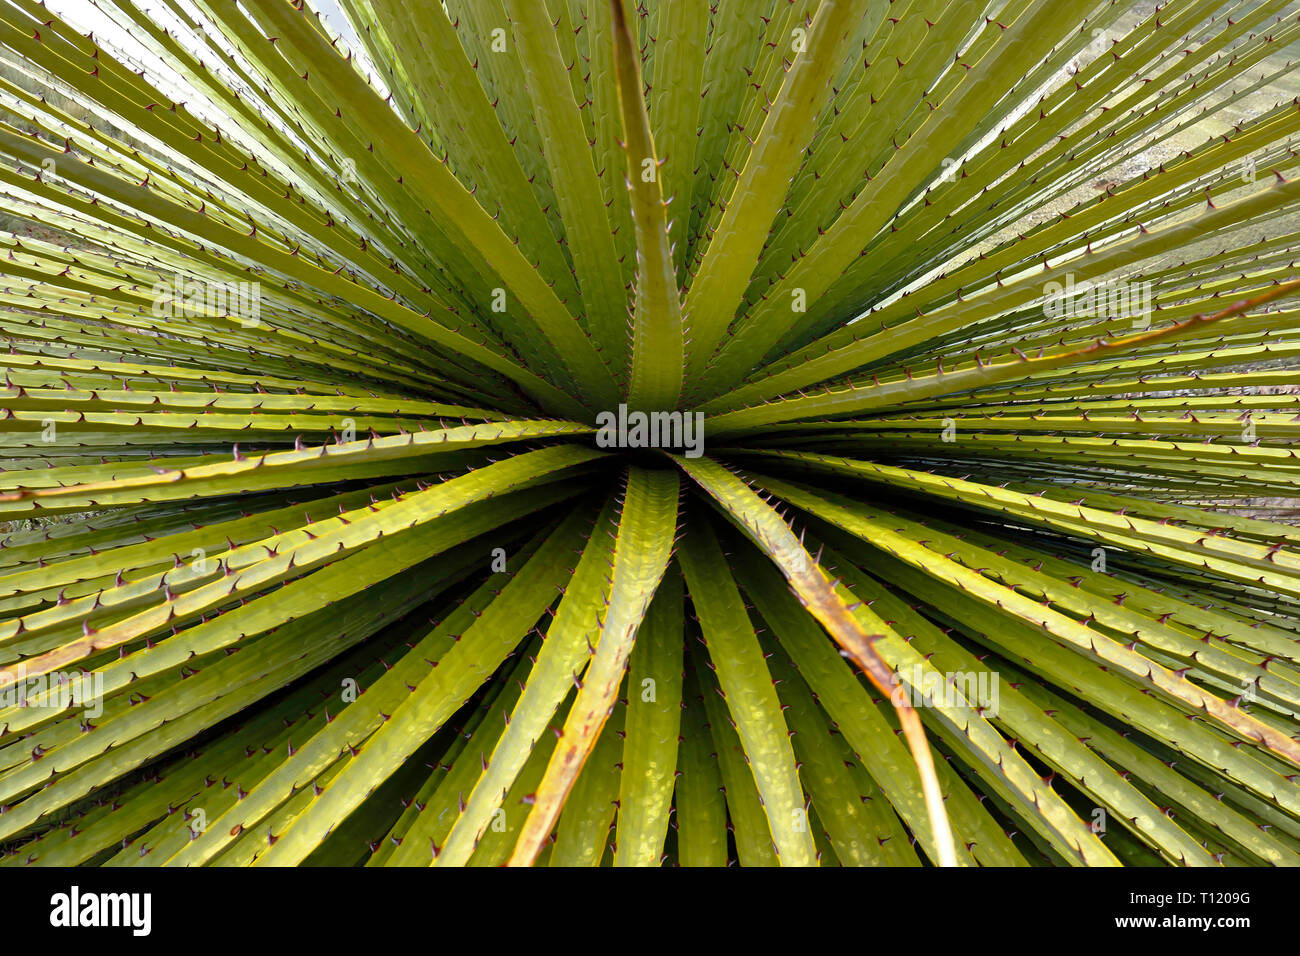 Beautiful specimen of Titanca (Puya raimondii) a species of endemic flora of the Andean region of Peru and Bolivia; in this case a detail of the plant Stock Photo